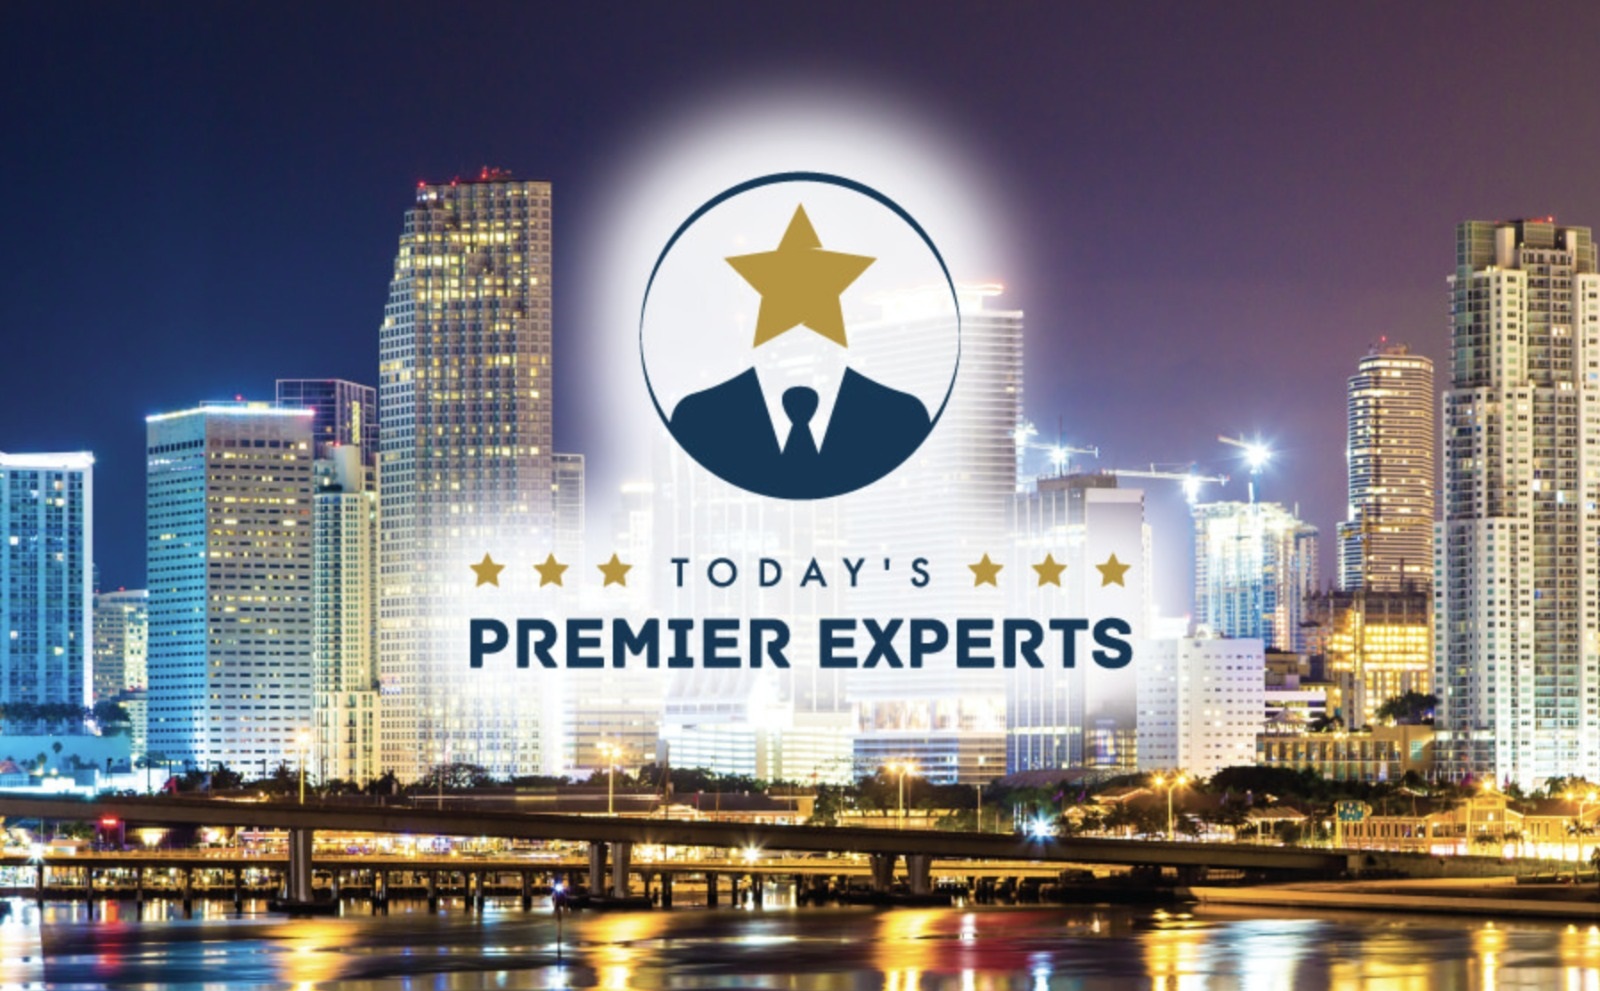 Today's Premier Experts